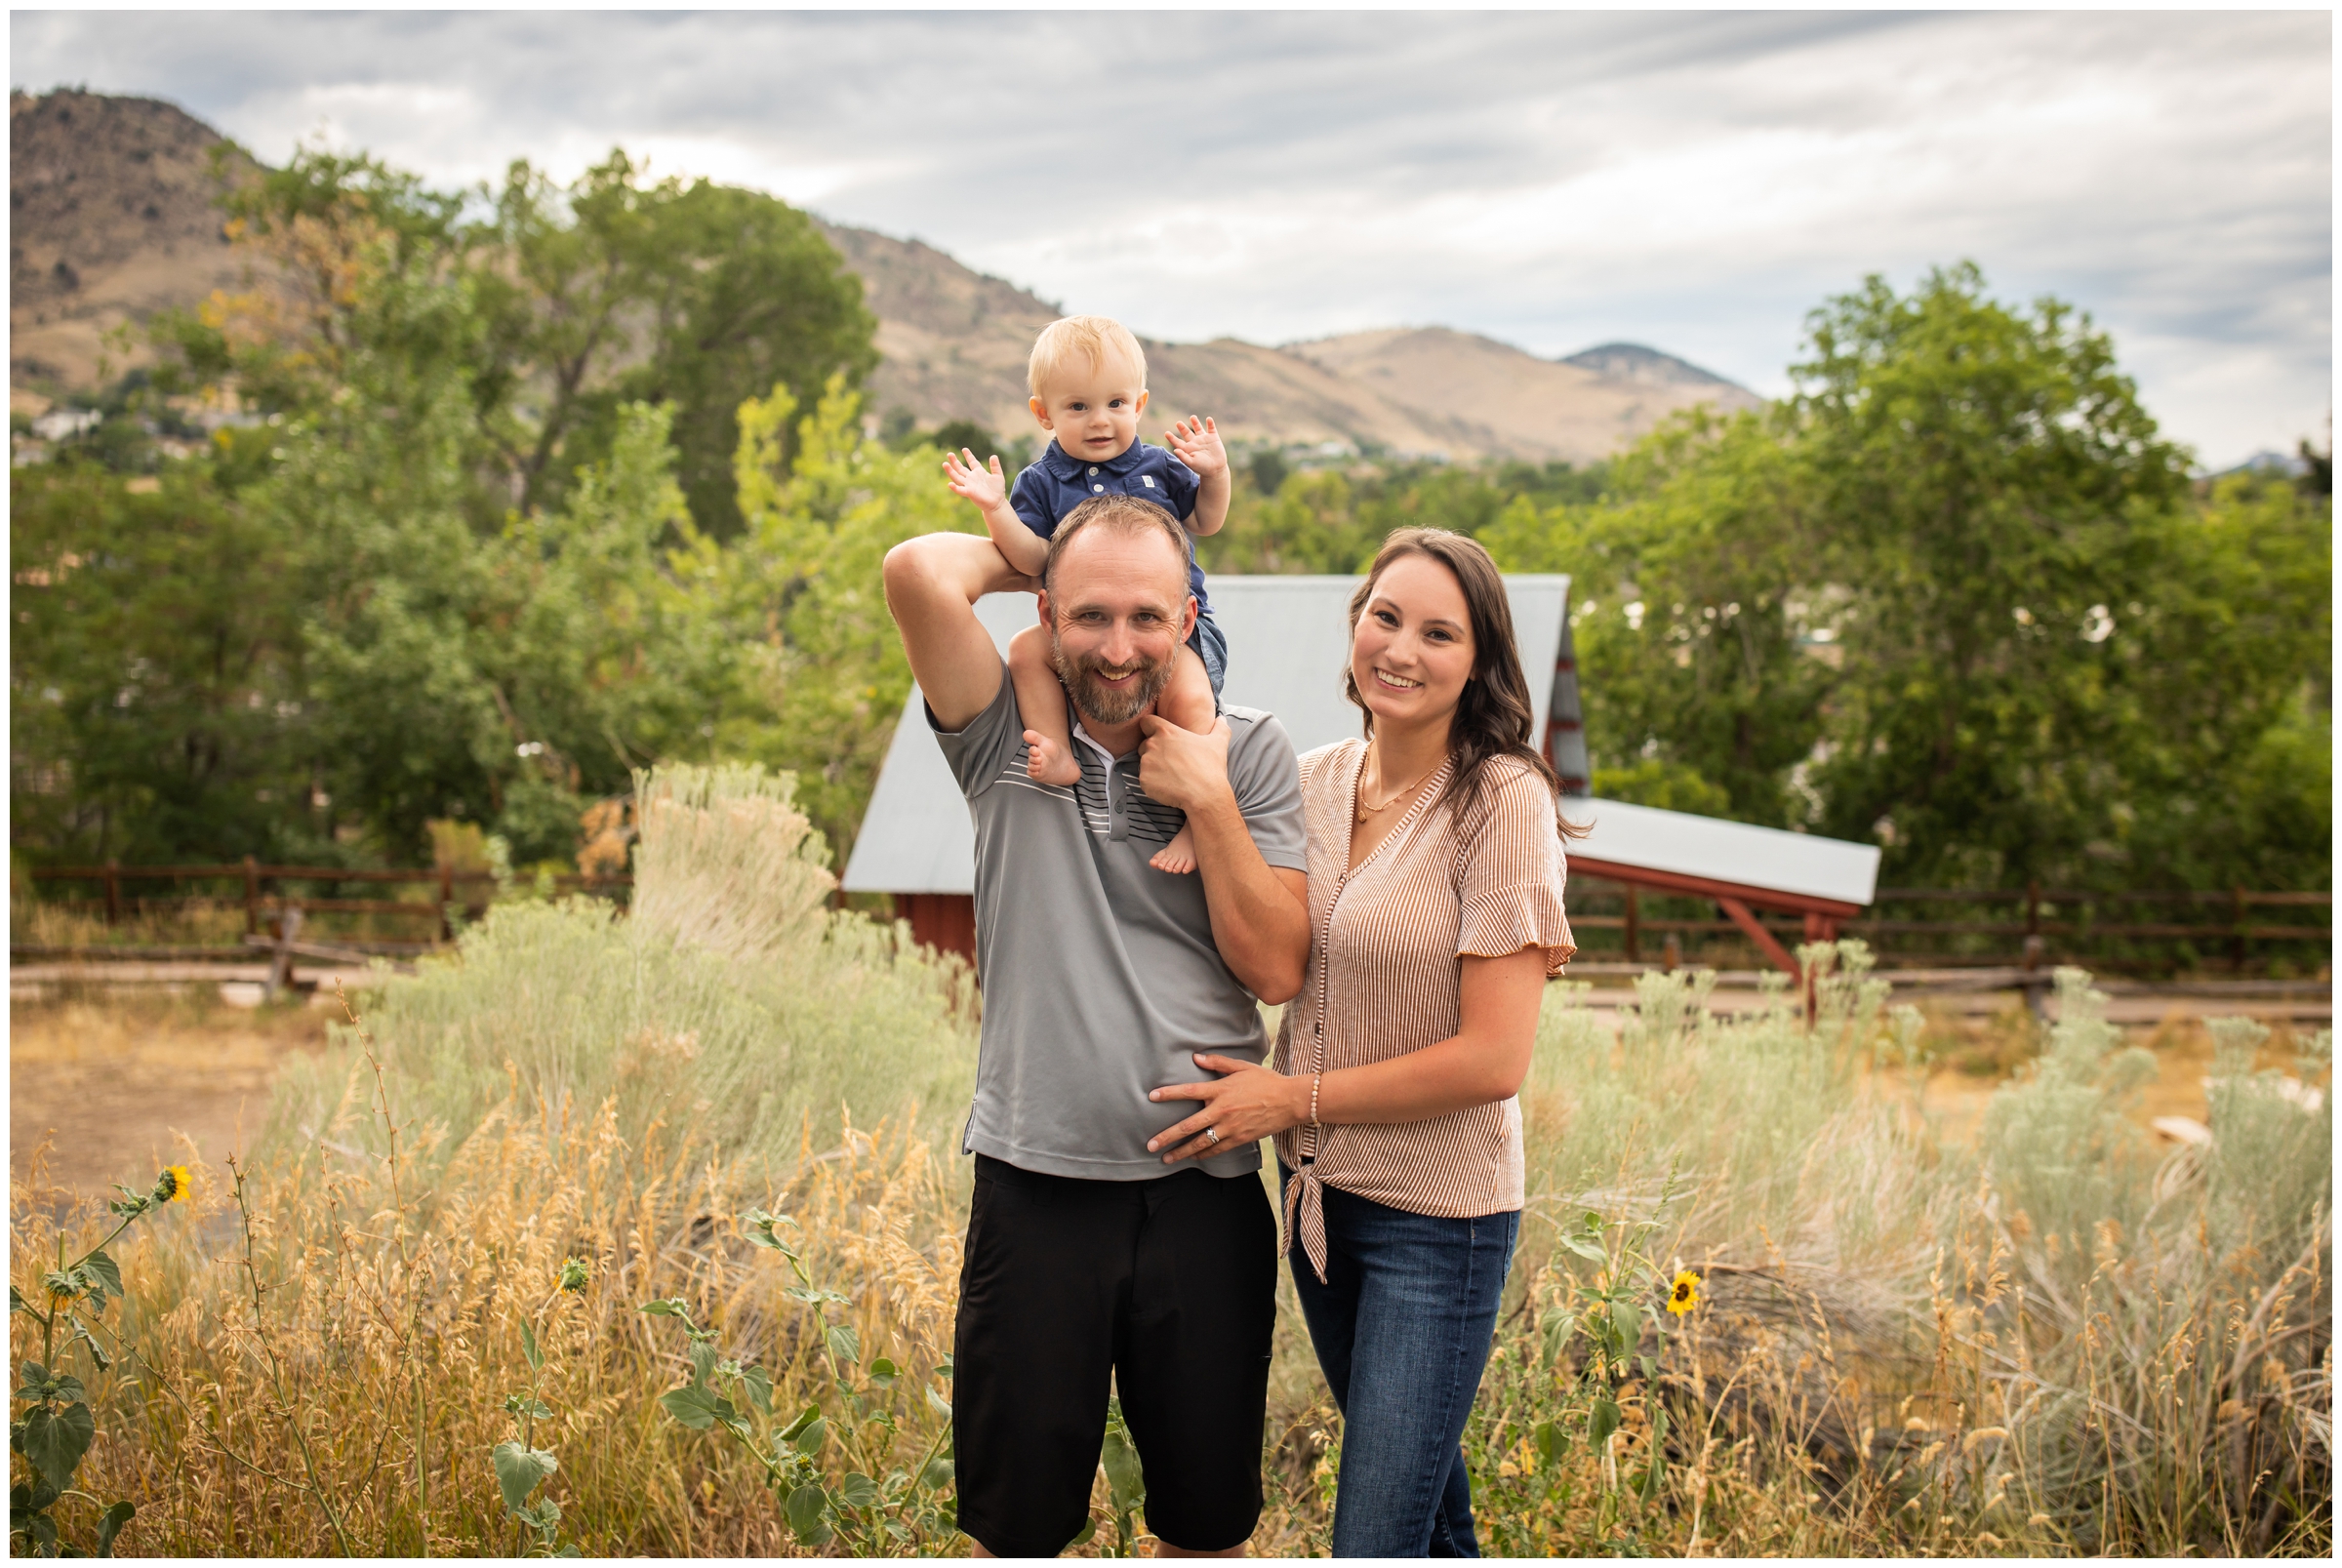 Colorado family photography session at the Golden History Park by Plum Pretty Photography